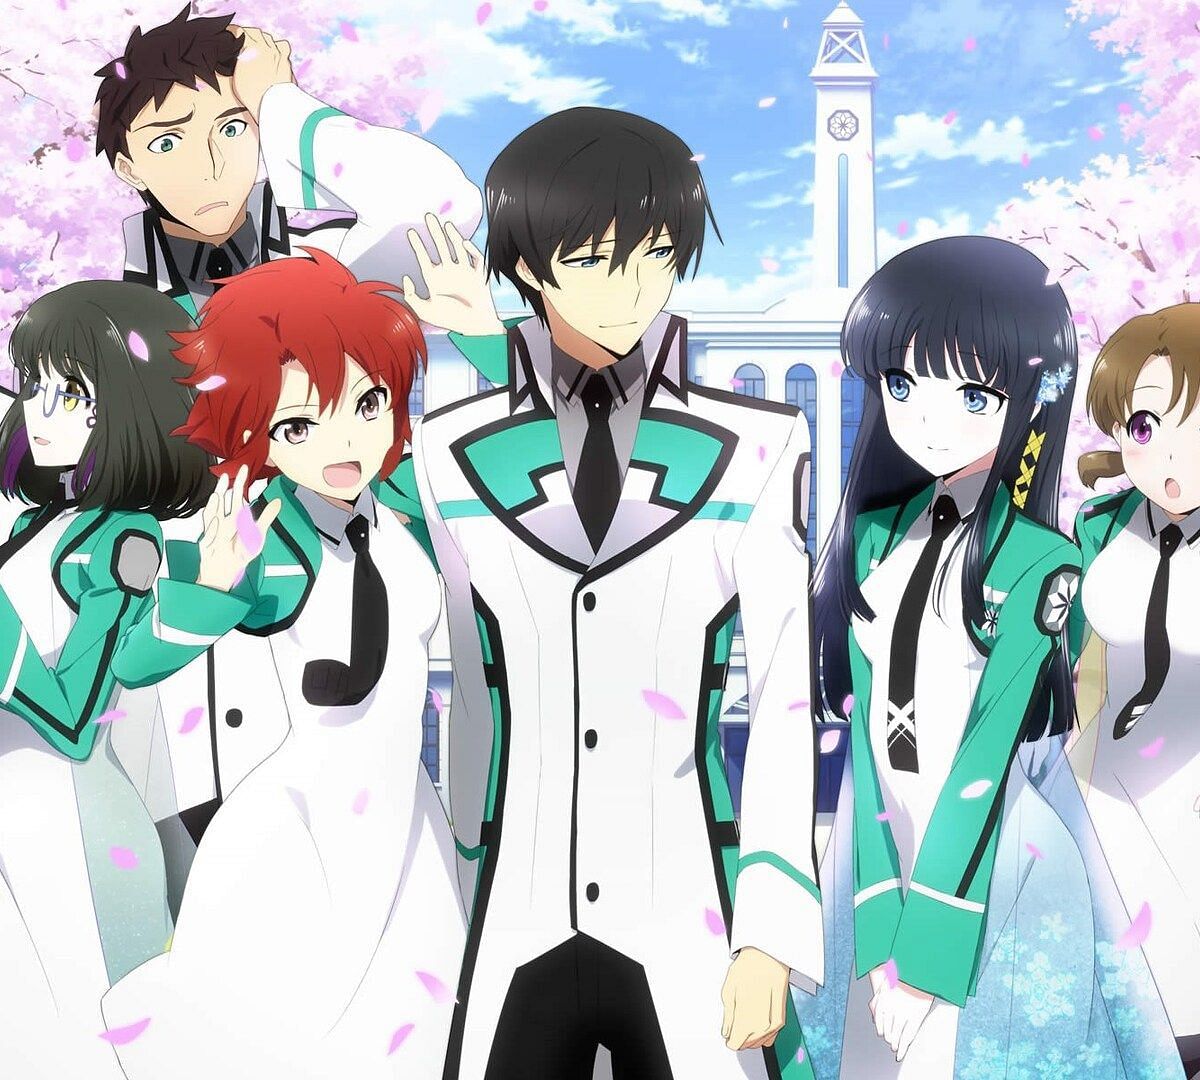 The Irregular at Magic High School characters as seen in the anime (Image via Madhouse)